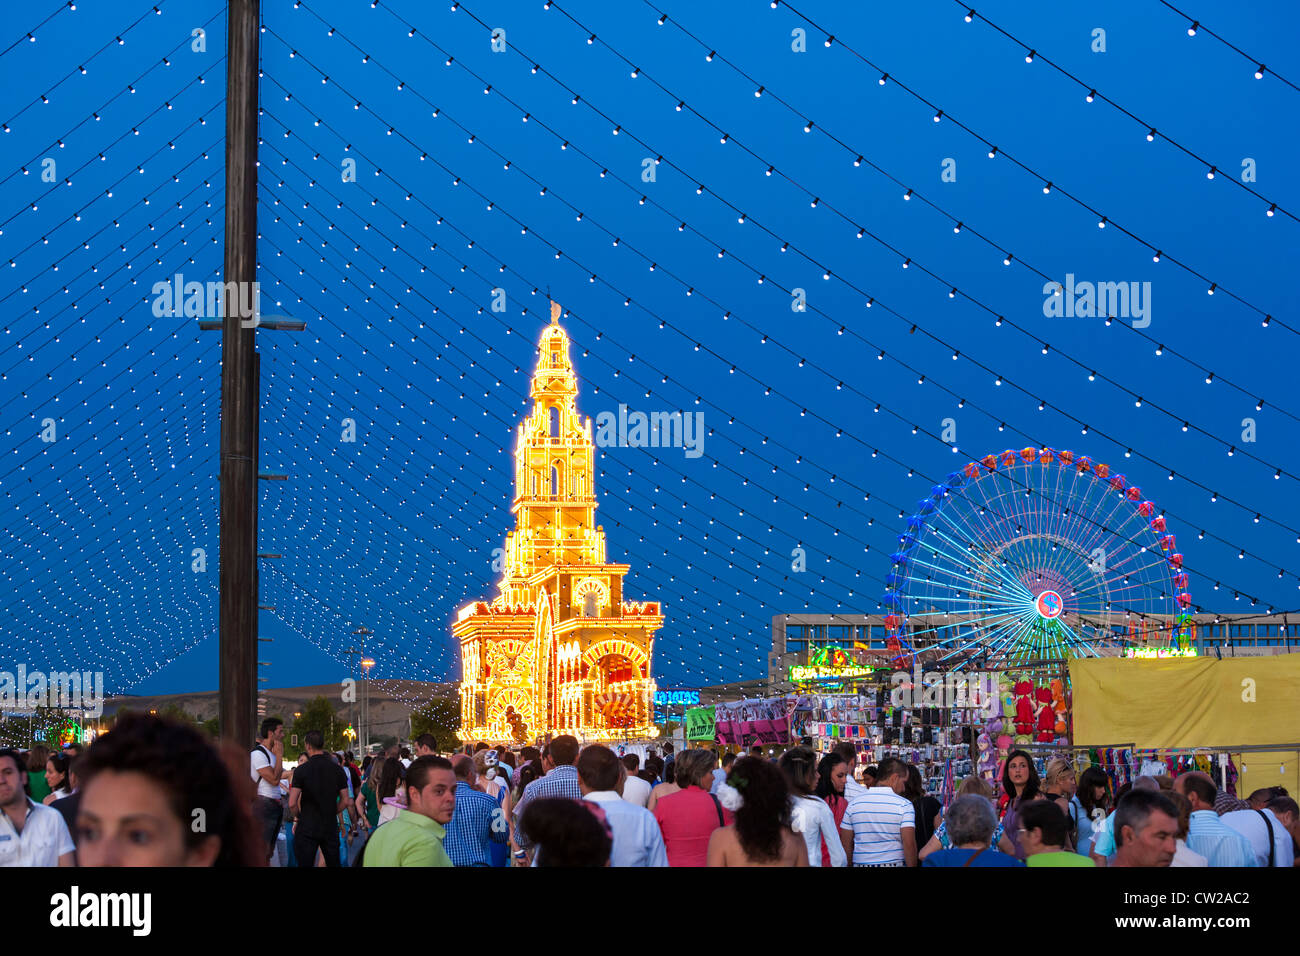 Cordoba, Andalusia, Andalucia, Spain, Crowds coming and going on the way to the fairground for the annual Feria festival in May. Stock Photo